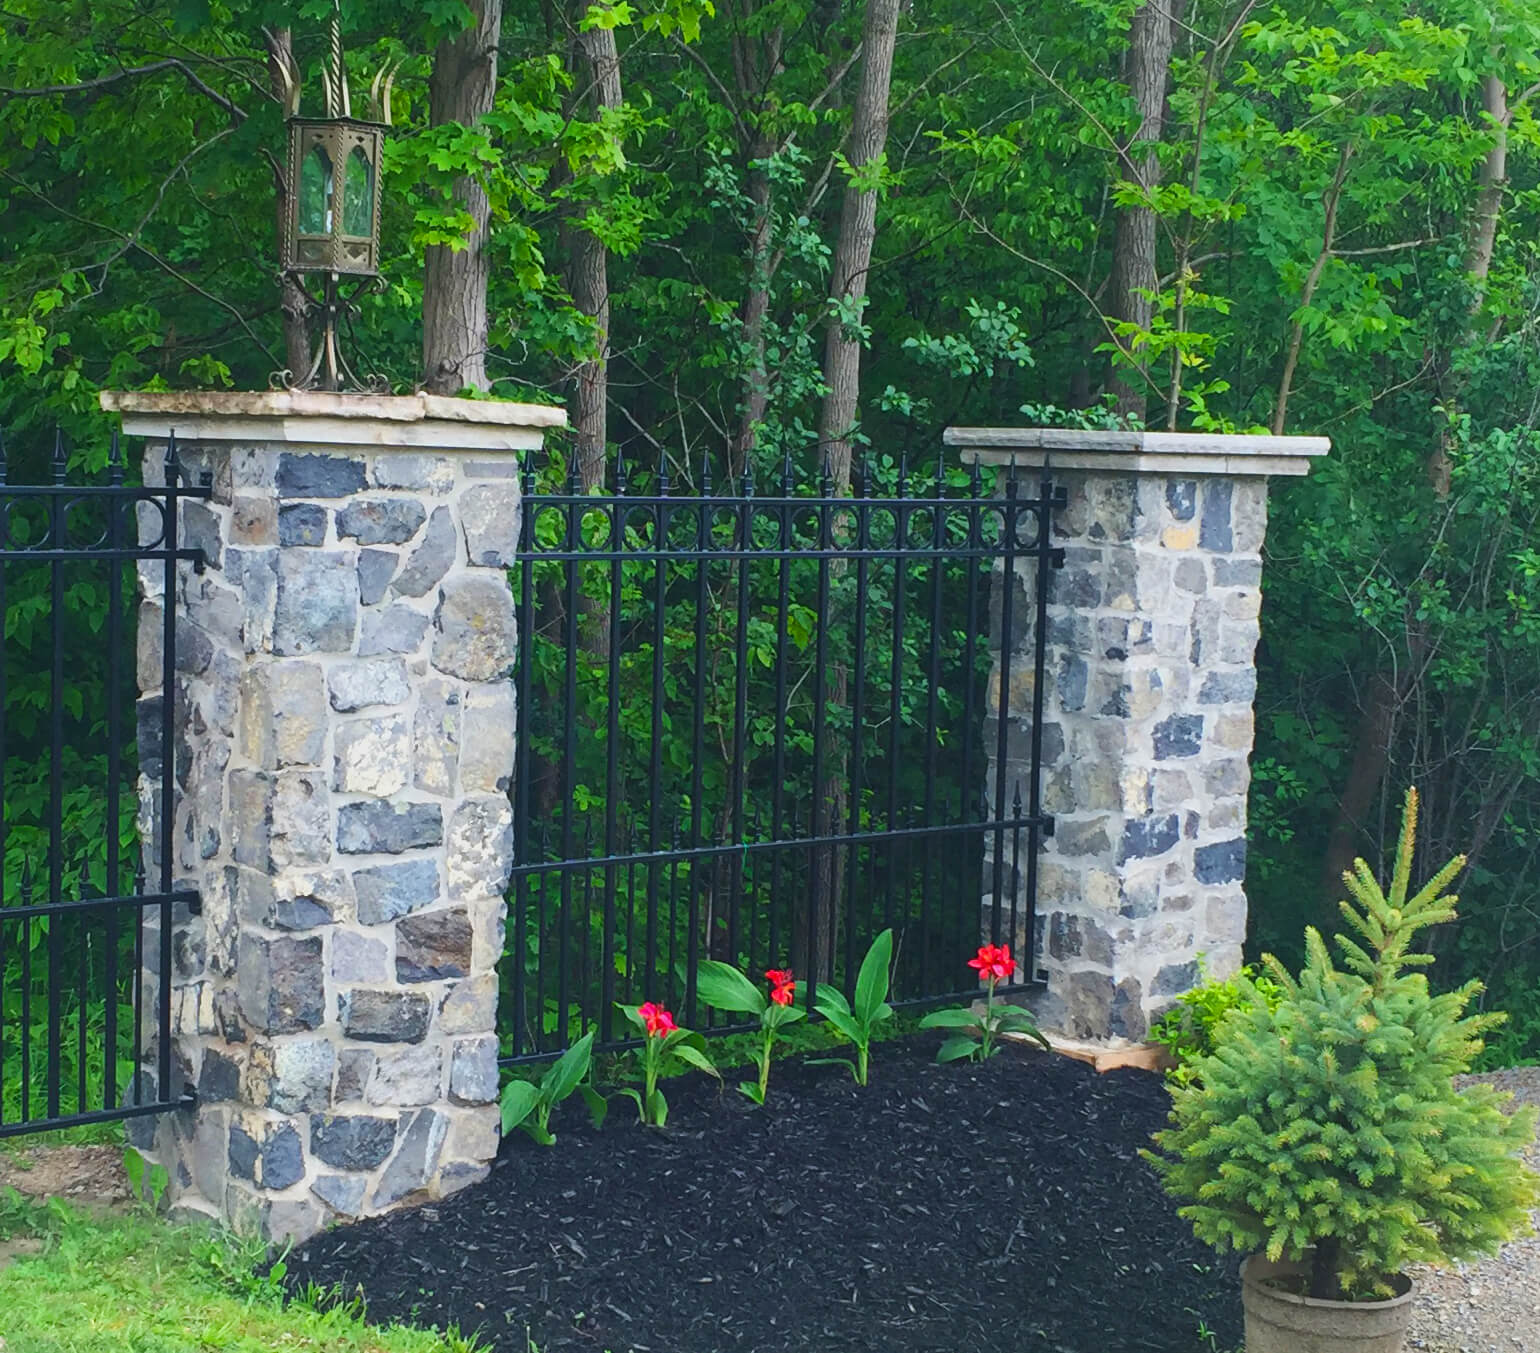 black wrought iron fence with a circle motif on top between square stone pillars. Red tulips planted in front and woods behind